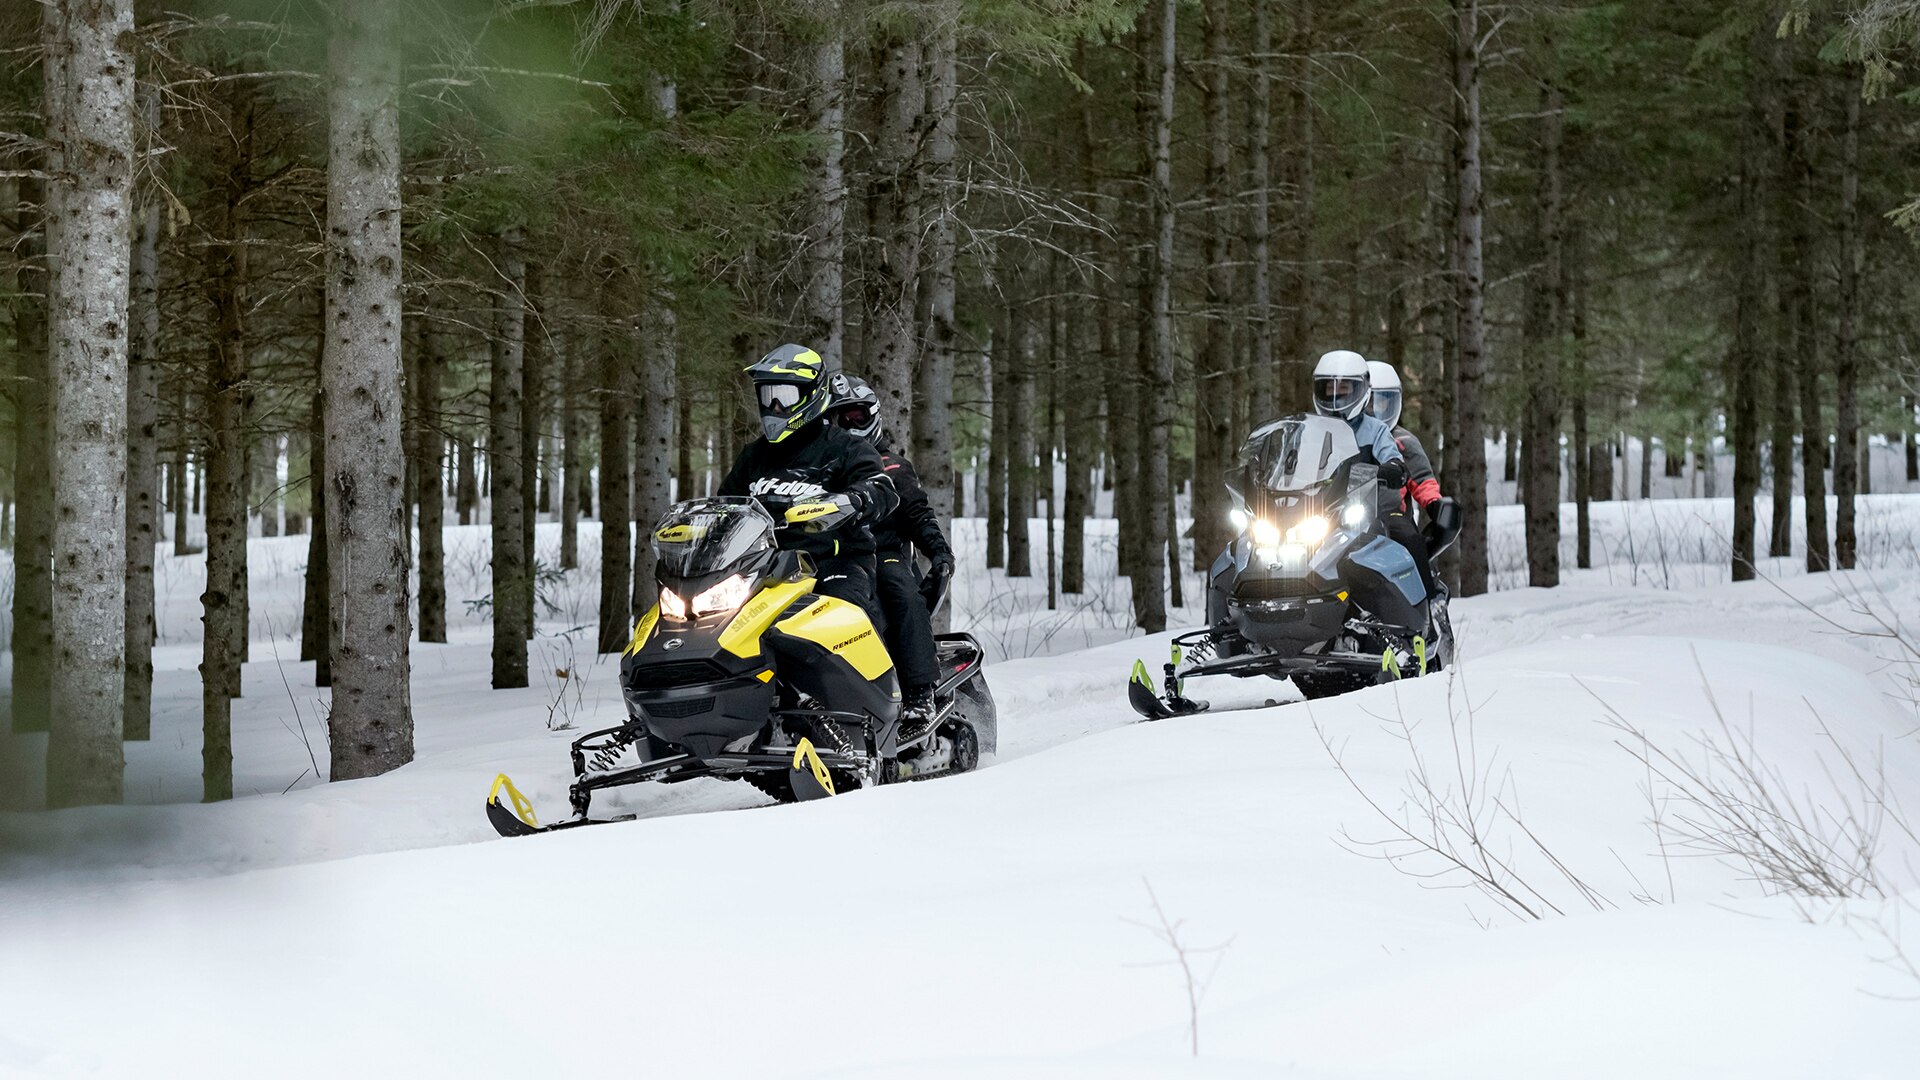 Crew of people riding on snowmobiles